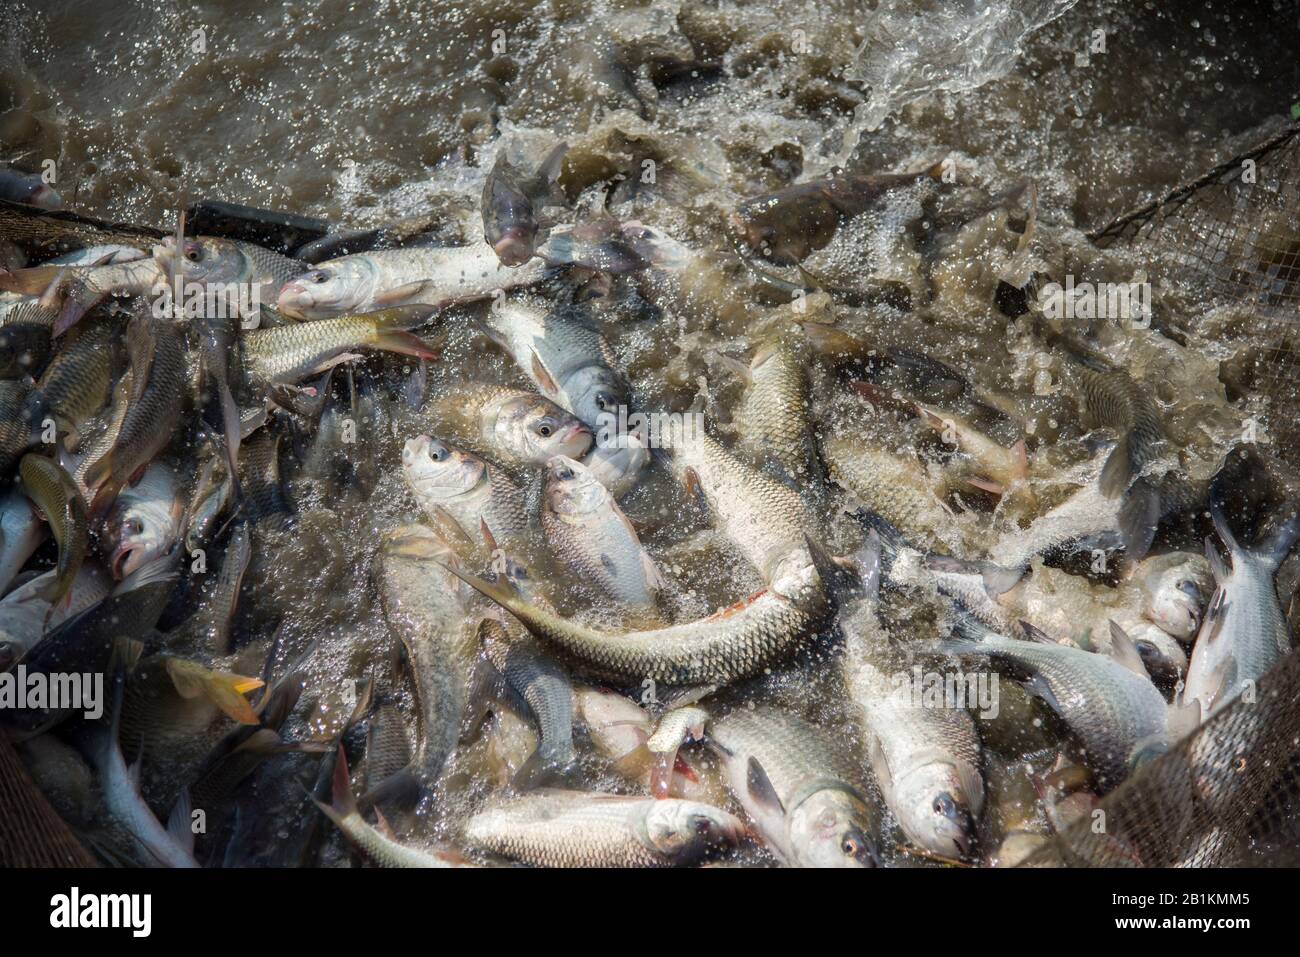 Carp is a fish species that belongs to the family Cyprinidae and is native to Asia and Eastern Europe. Fish are jumping during harvesting in the pond. Stock Photo